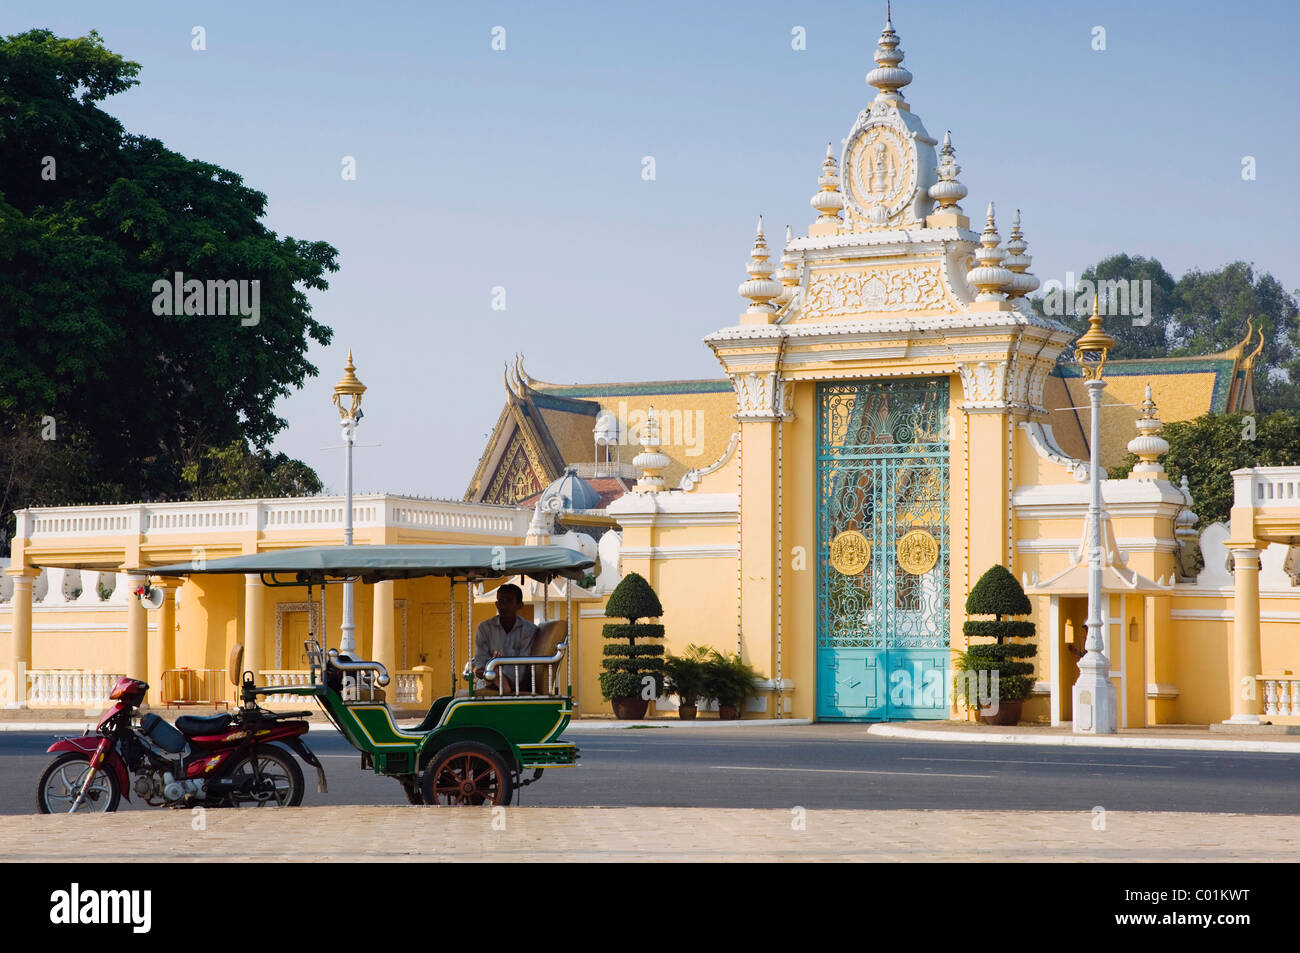 Tuk Tuk taxi in front of Victory Gate, Royal Palace, Phnom Penh, Cambodia, Indochina, Southeast Asia, Asia Stock Photo